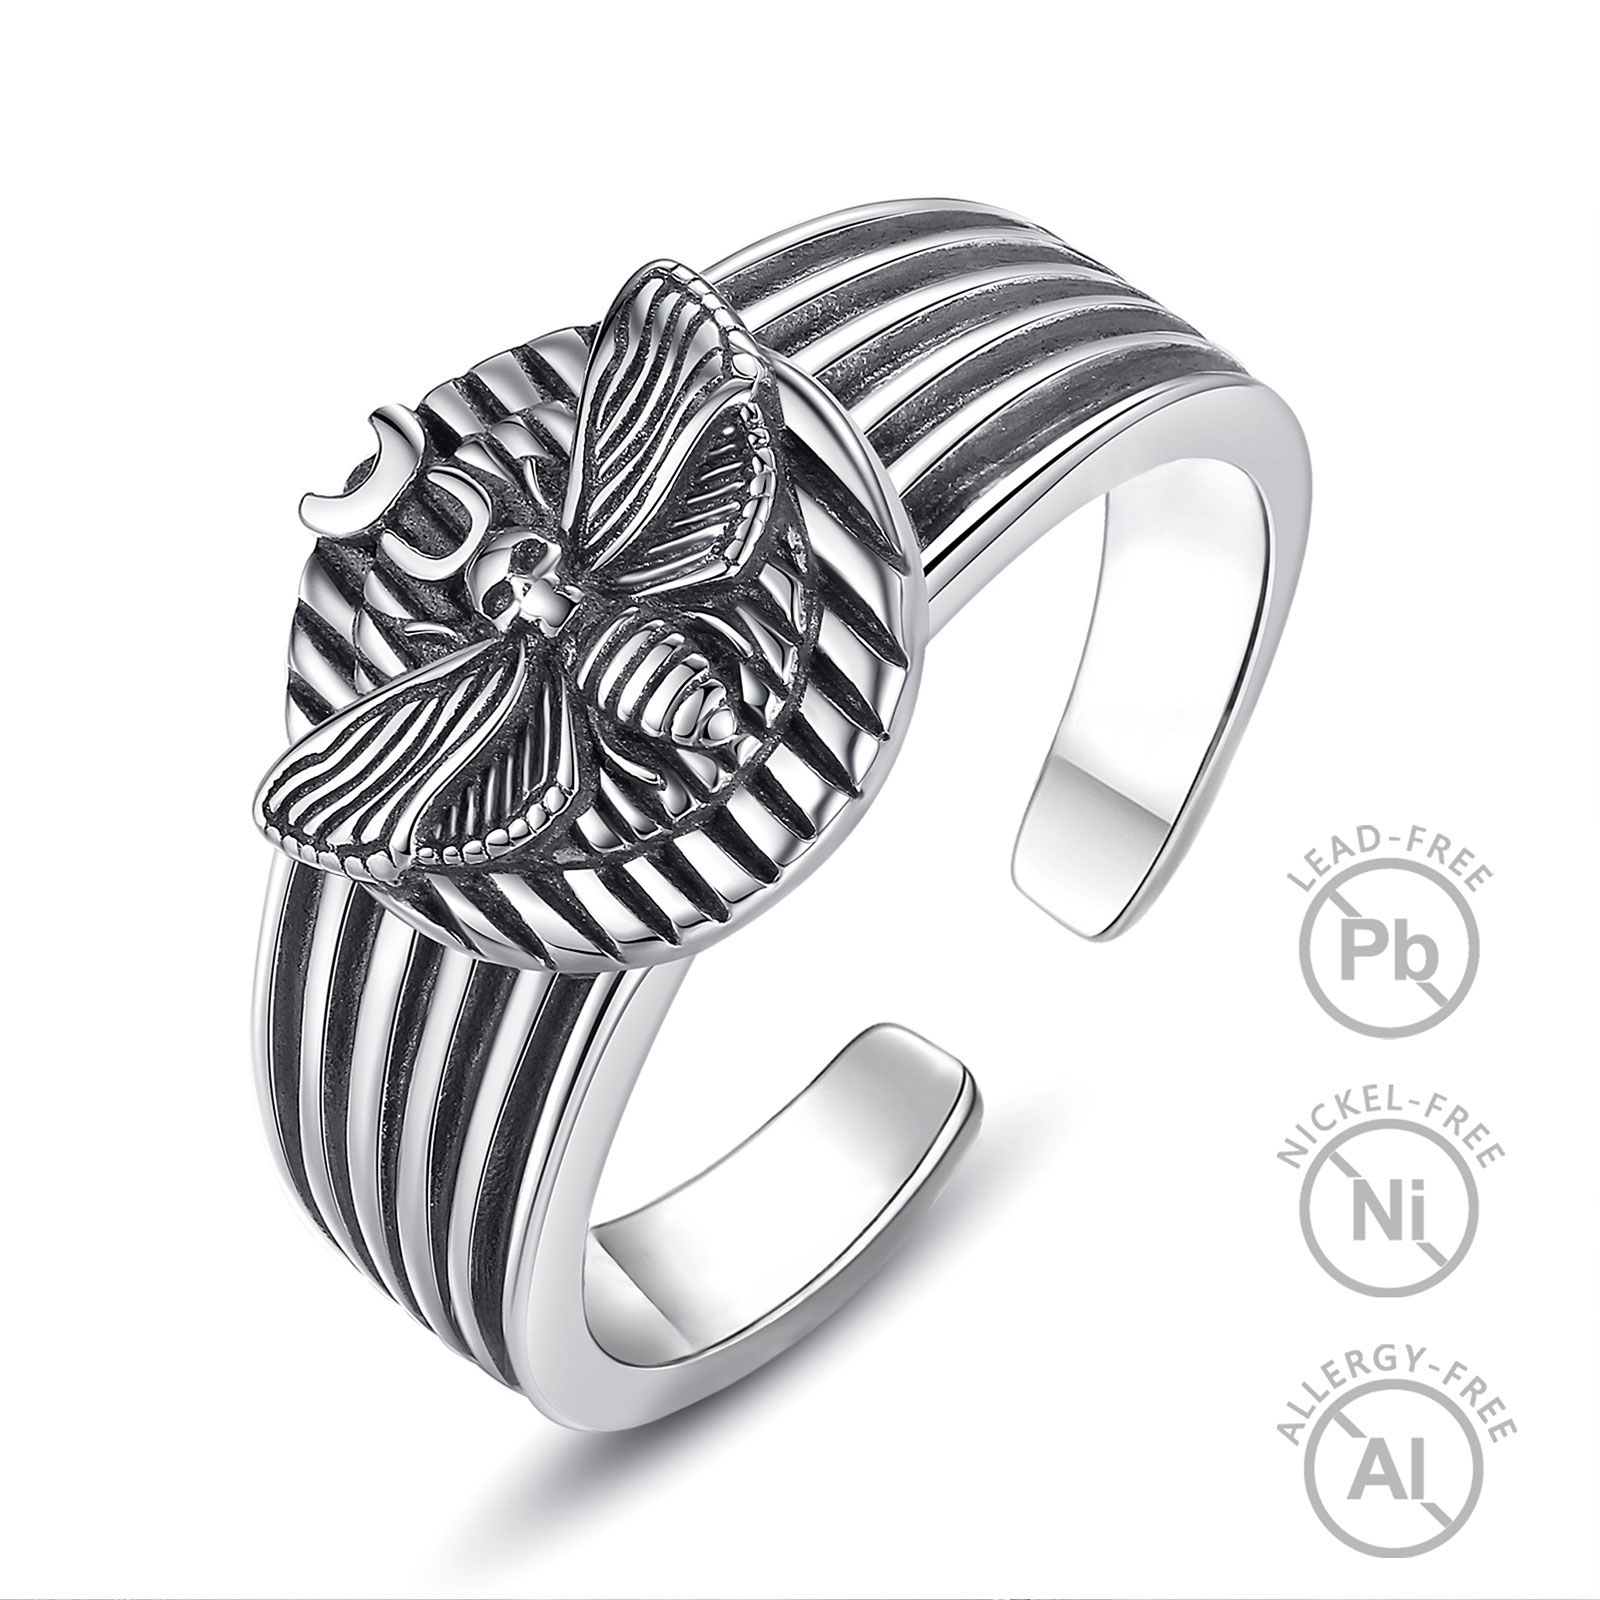 Merryshine Jewelry China Wholesale Price 925 Sterling Silver Open Adjustable Size Bee Design Vintage Rings for Men